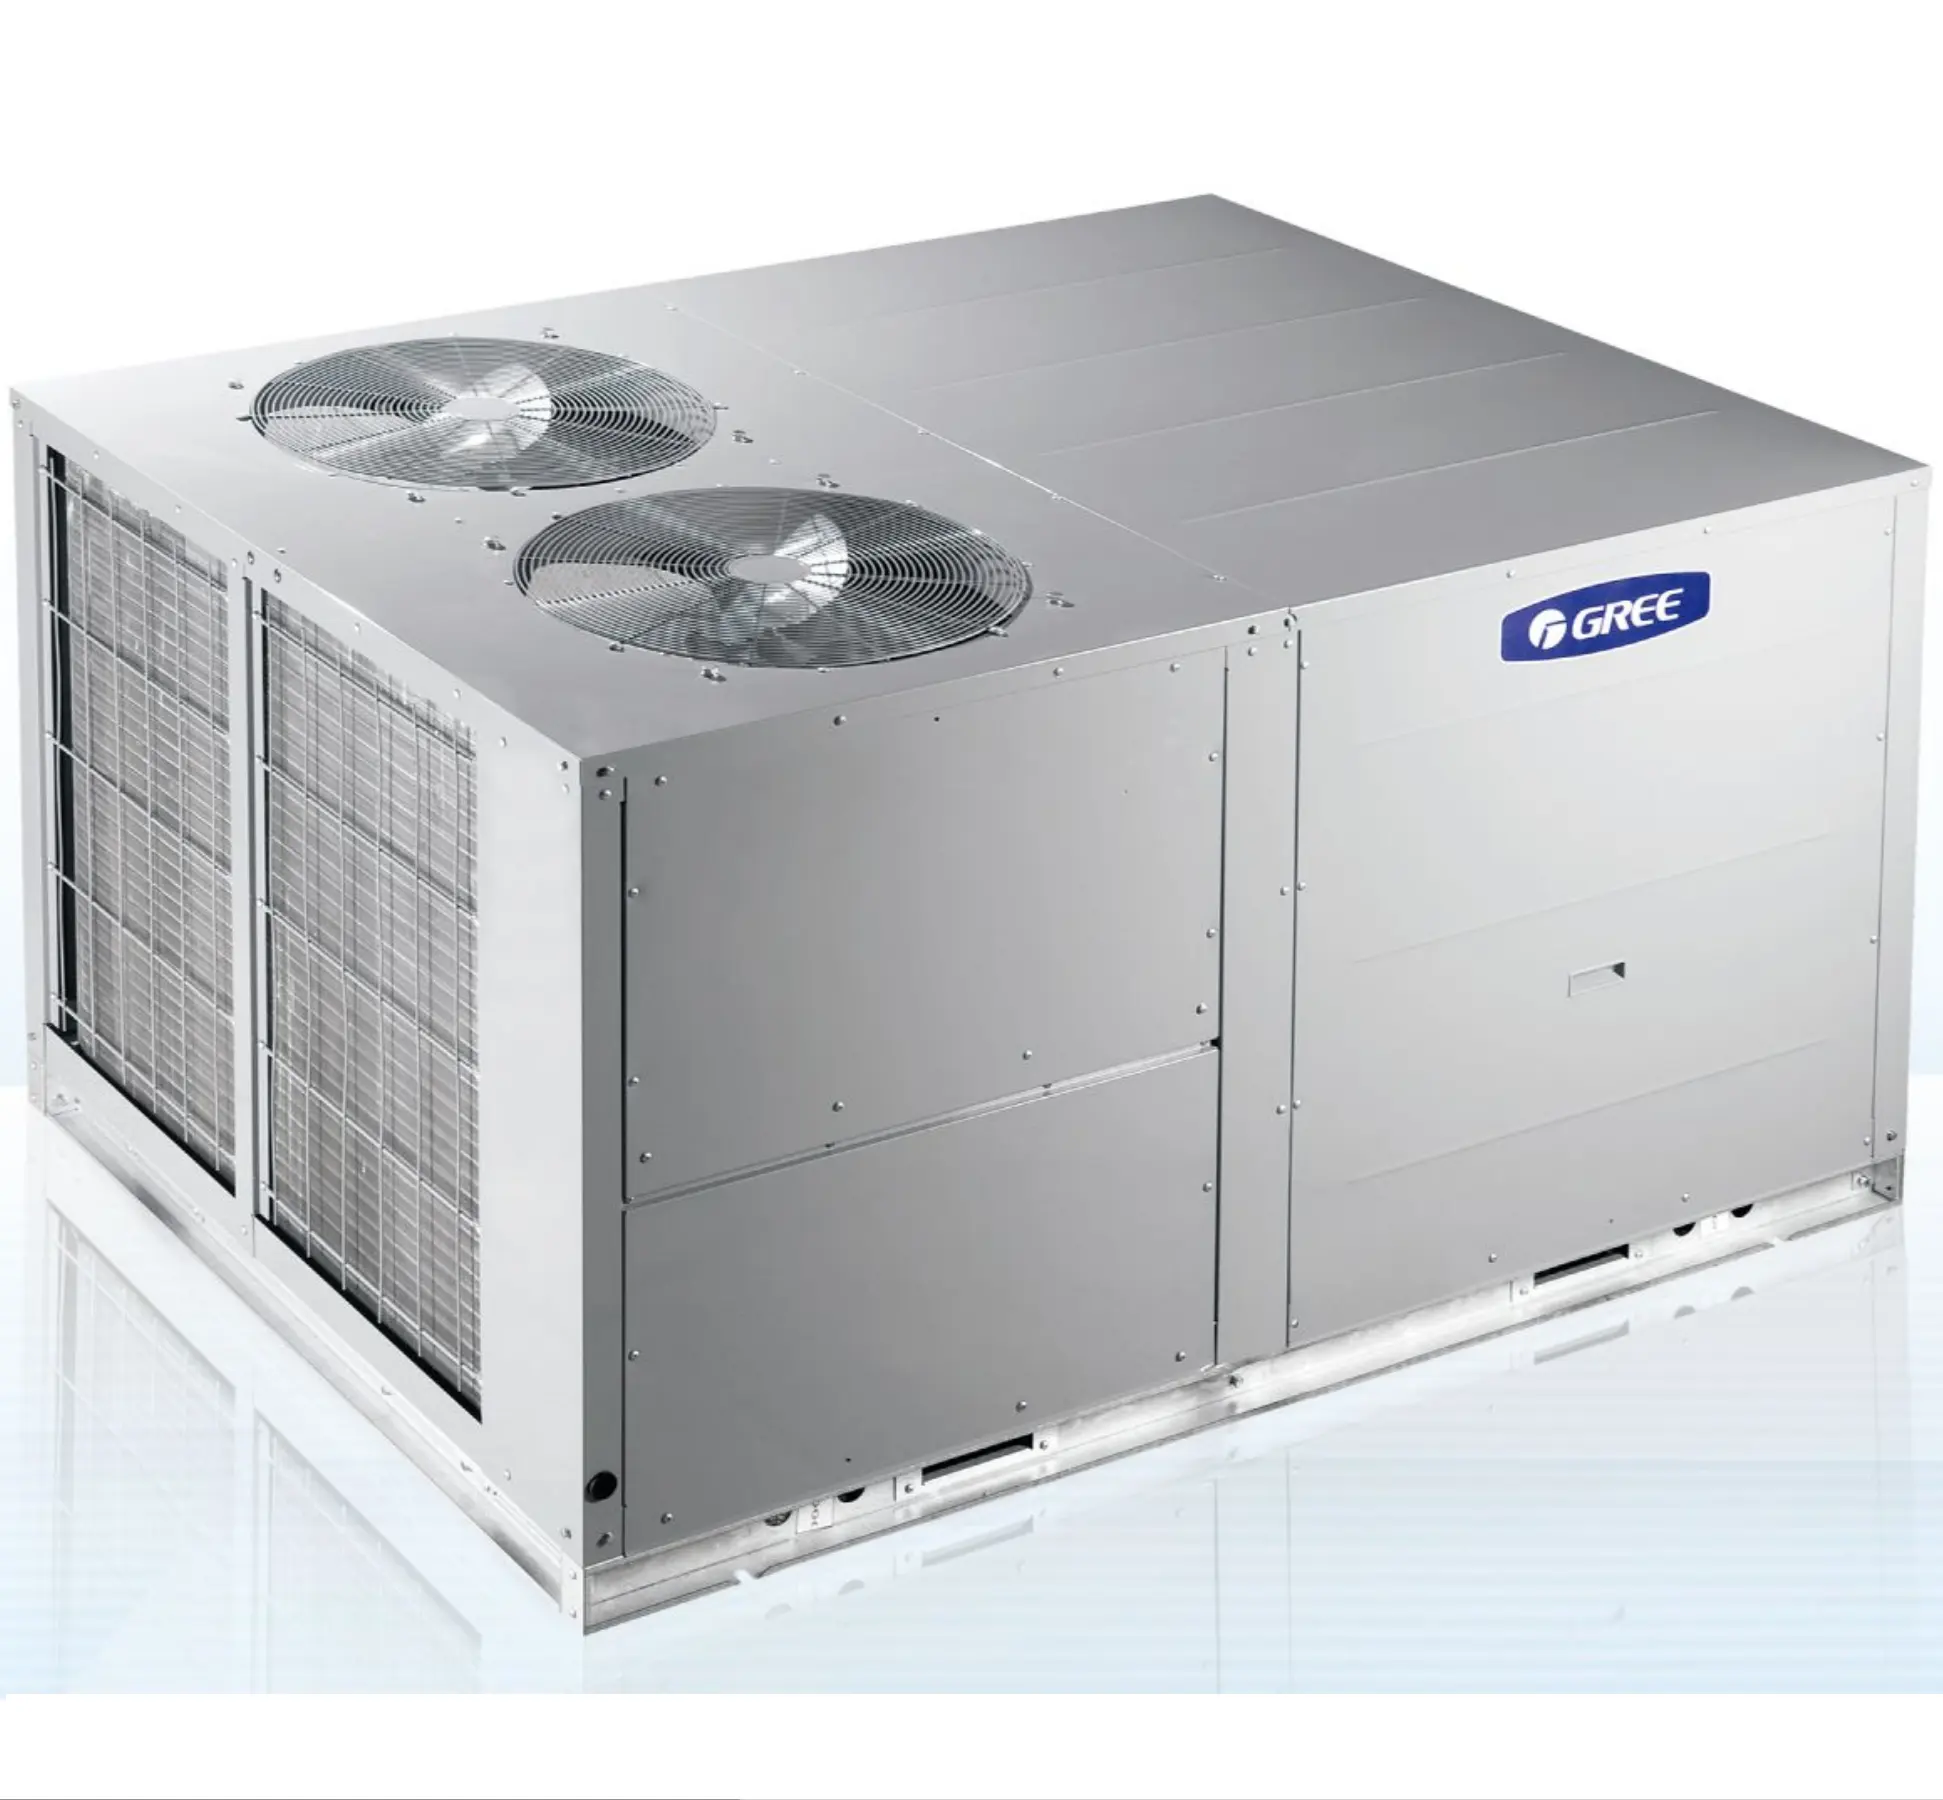 GK-H25TC1AF 25トンRooftop greeエアコンパッケージユニットヒートポンプCommercial Air Conditioner